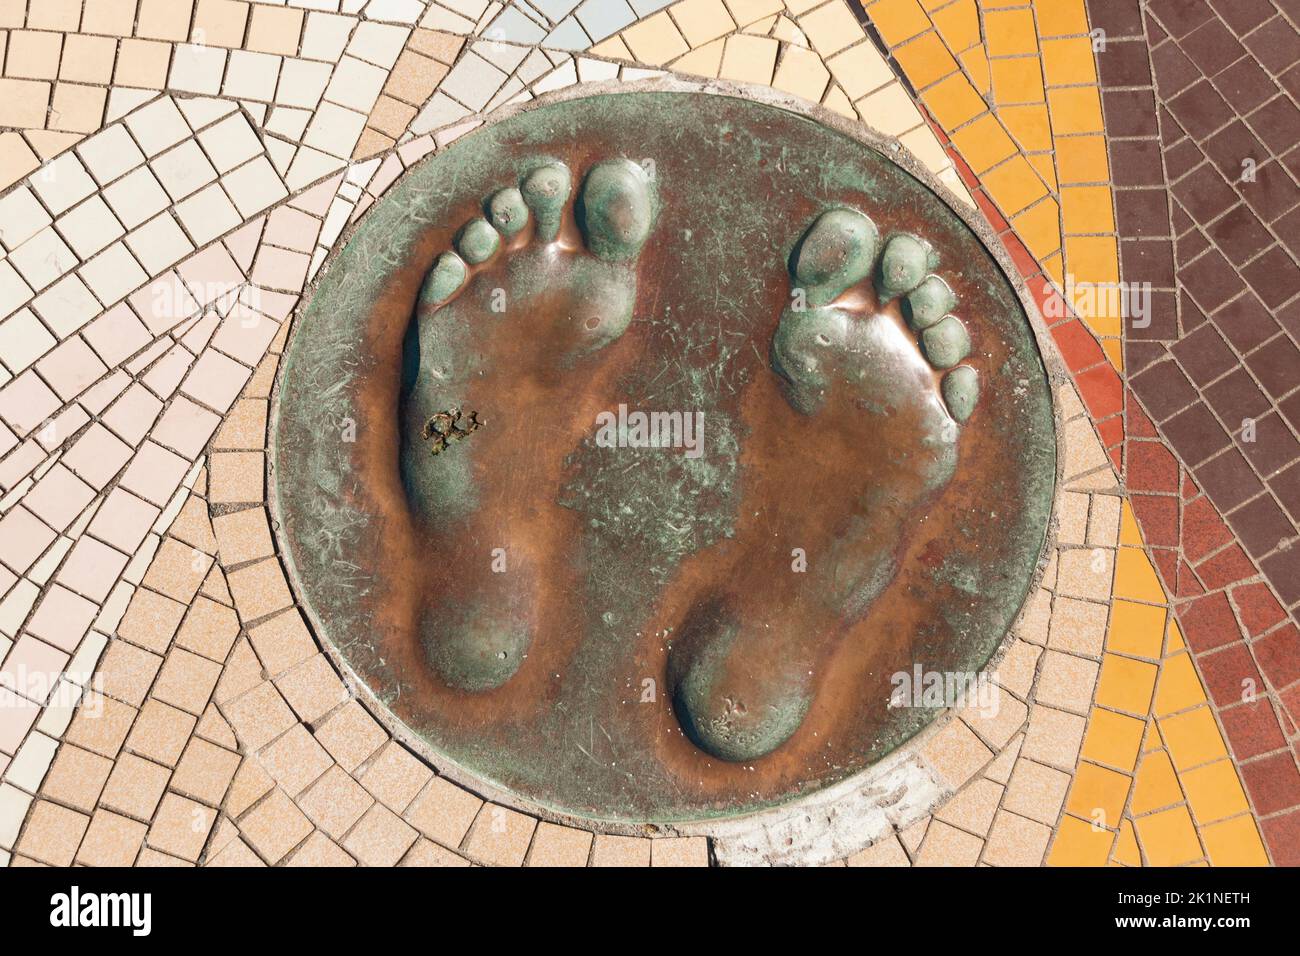 Iifracombe-Devon-England-2022-The mould of Johathan Edwards the triple jumper's landed feet. Stock Photo